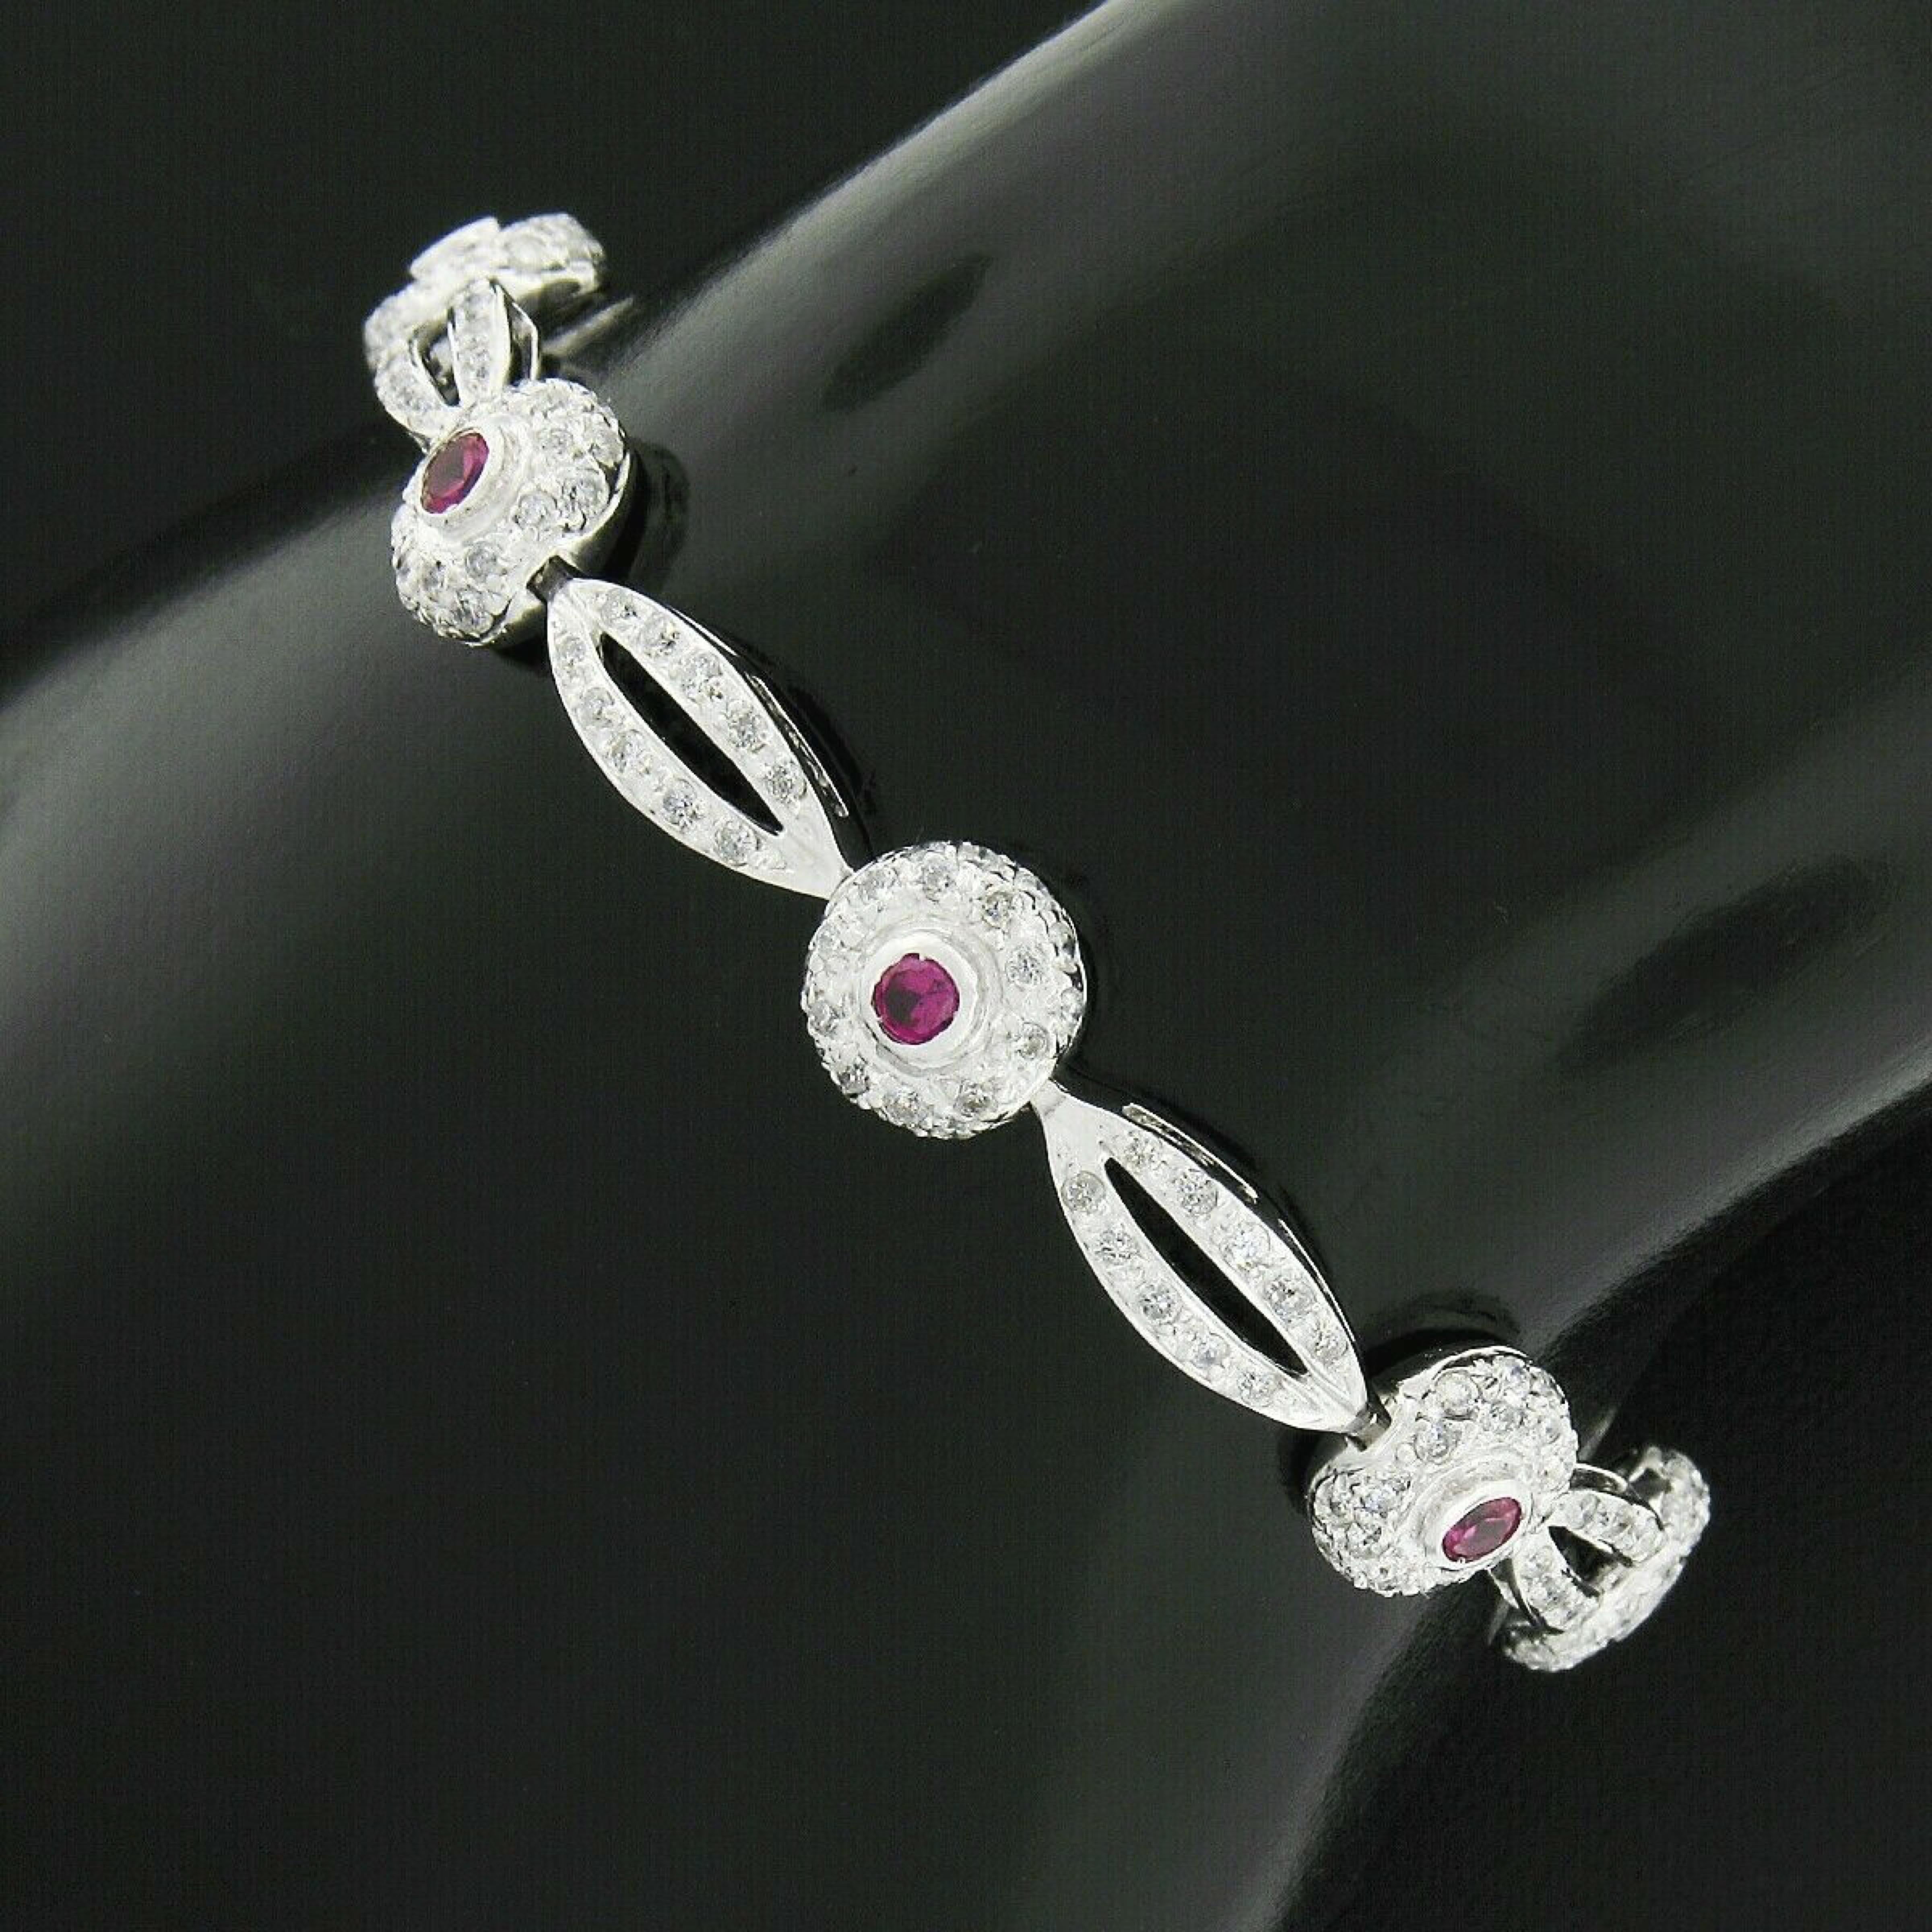 Here we have an absolutely breathtaking bracelet that is crafted in solid 18k white gold and completely drenched with fine quality diamonds with gorgeous ruby accents throughout. The round brilliant cut diamonds are neatly pave set throughout the